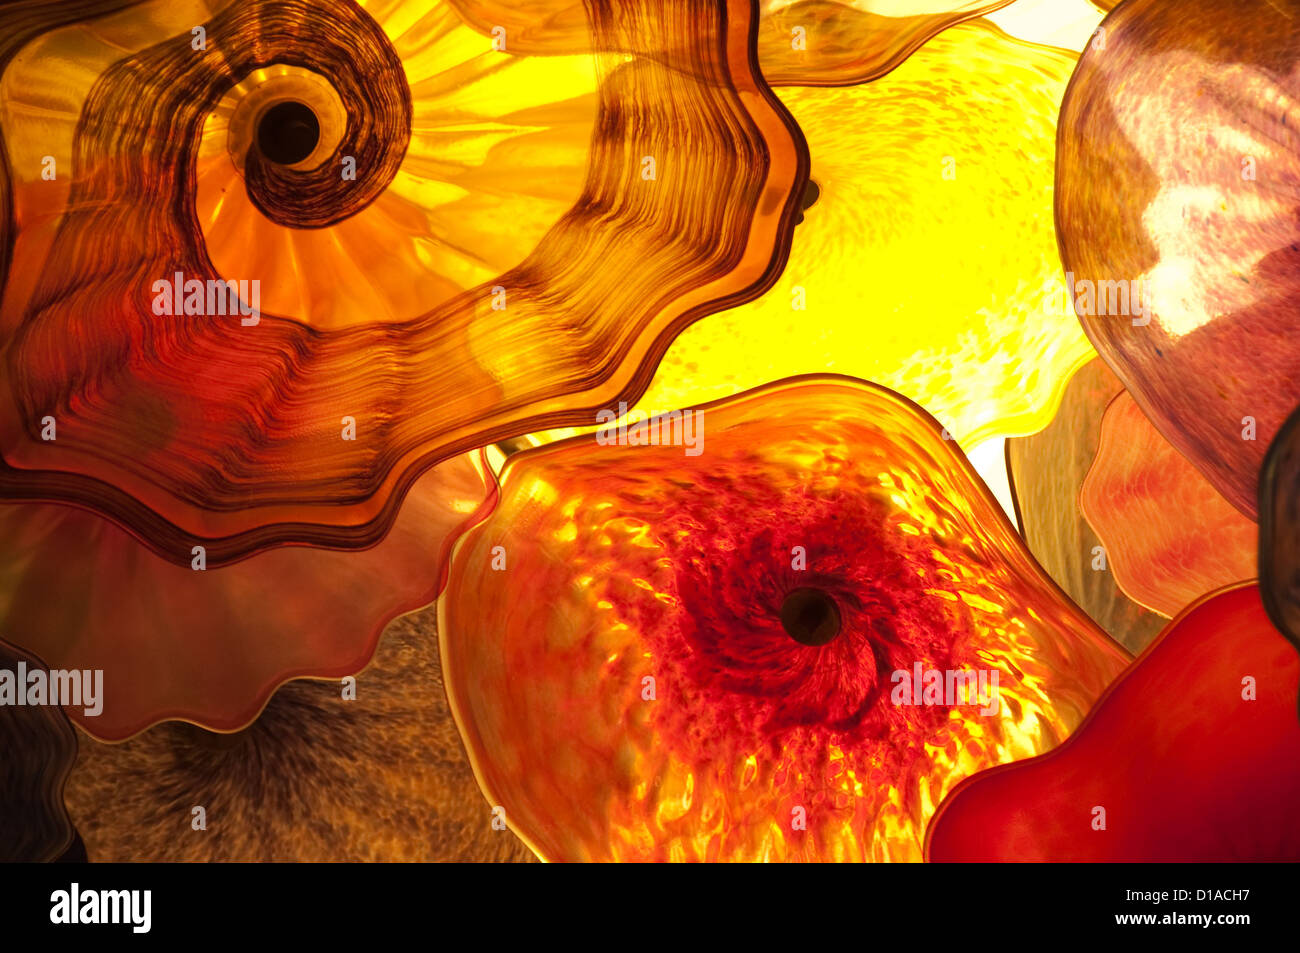 Chihuly Glass Art Ceiling At The Bellagio In Las Vegas Stock Photo